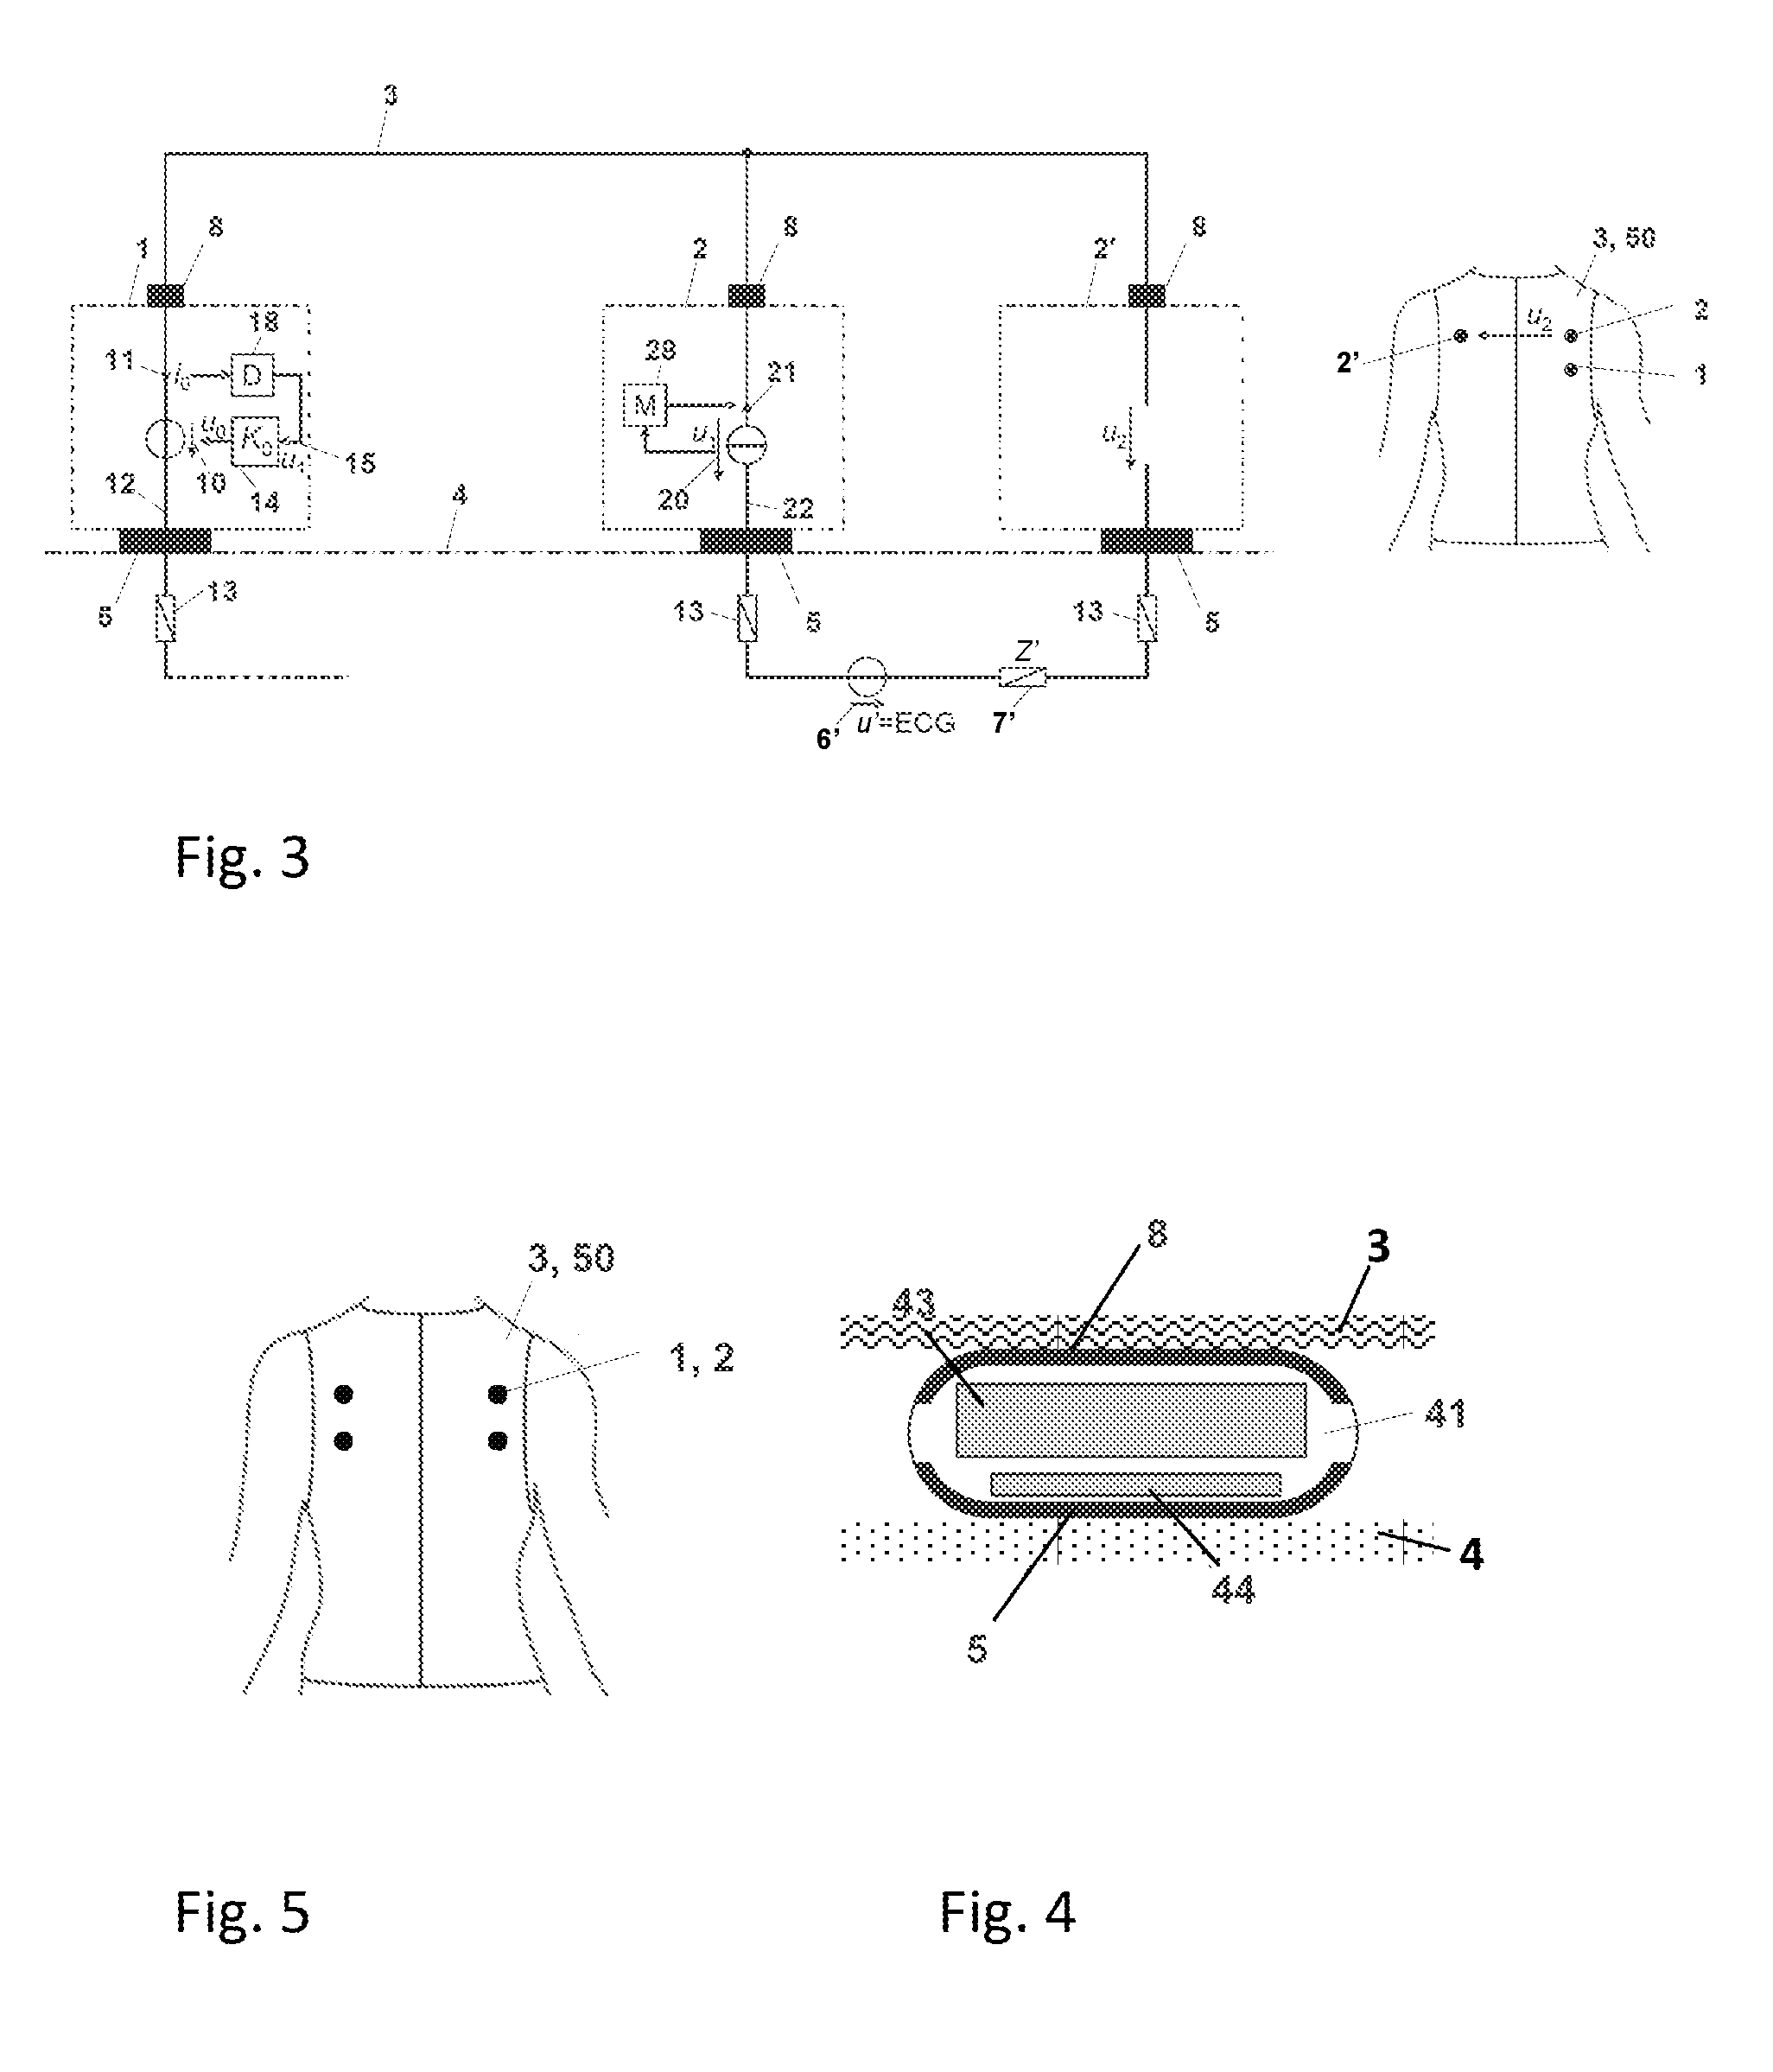 Measurement device for measuring bio-impedance and/or a bio-potential of a human or animal body